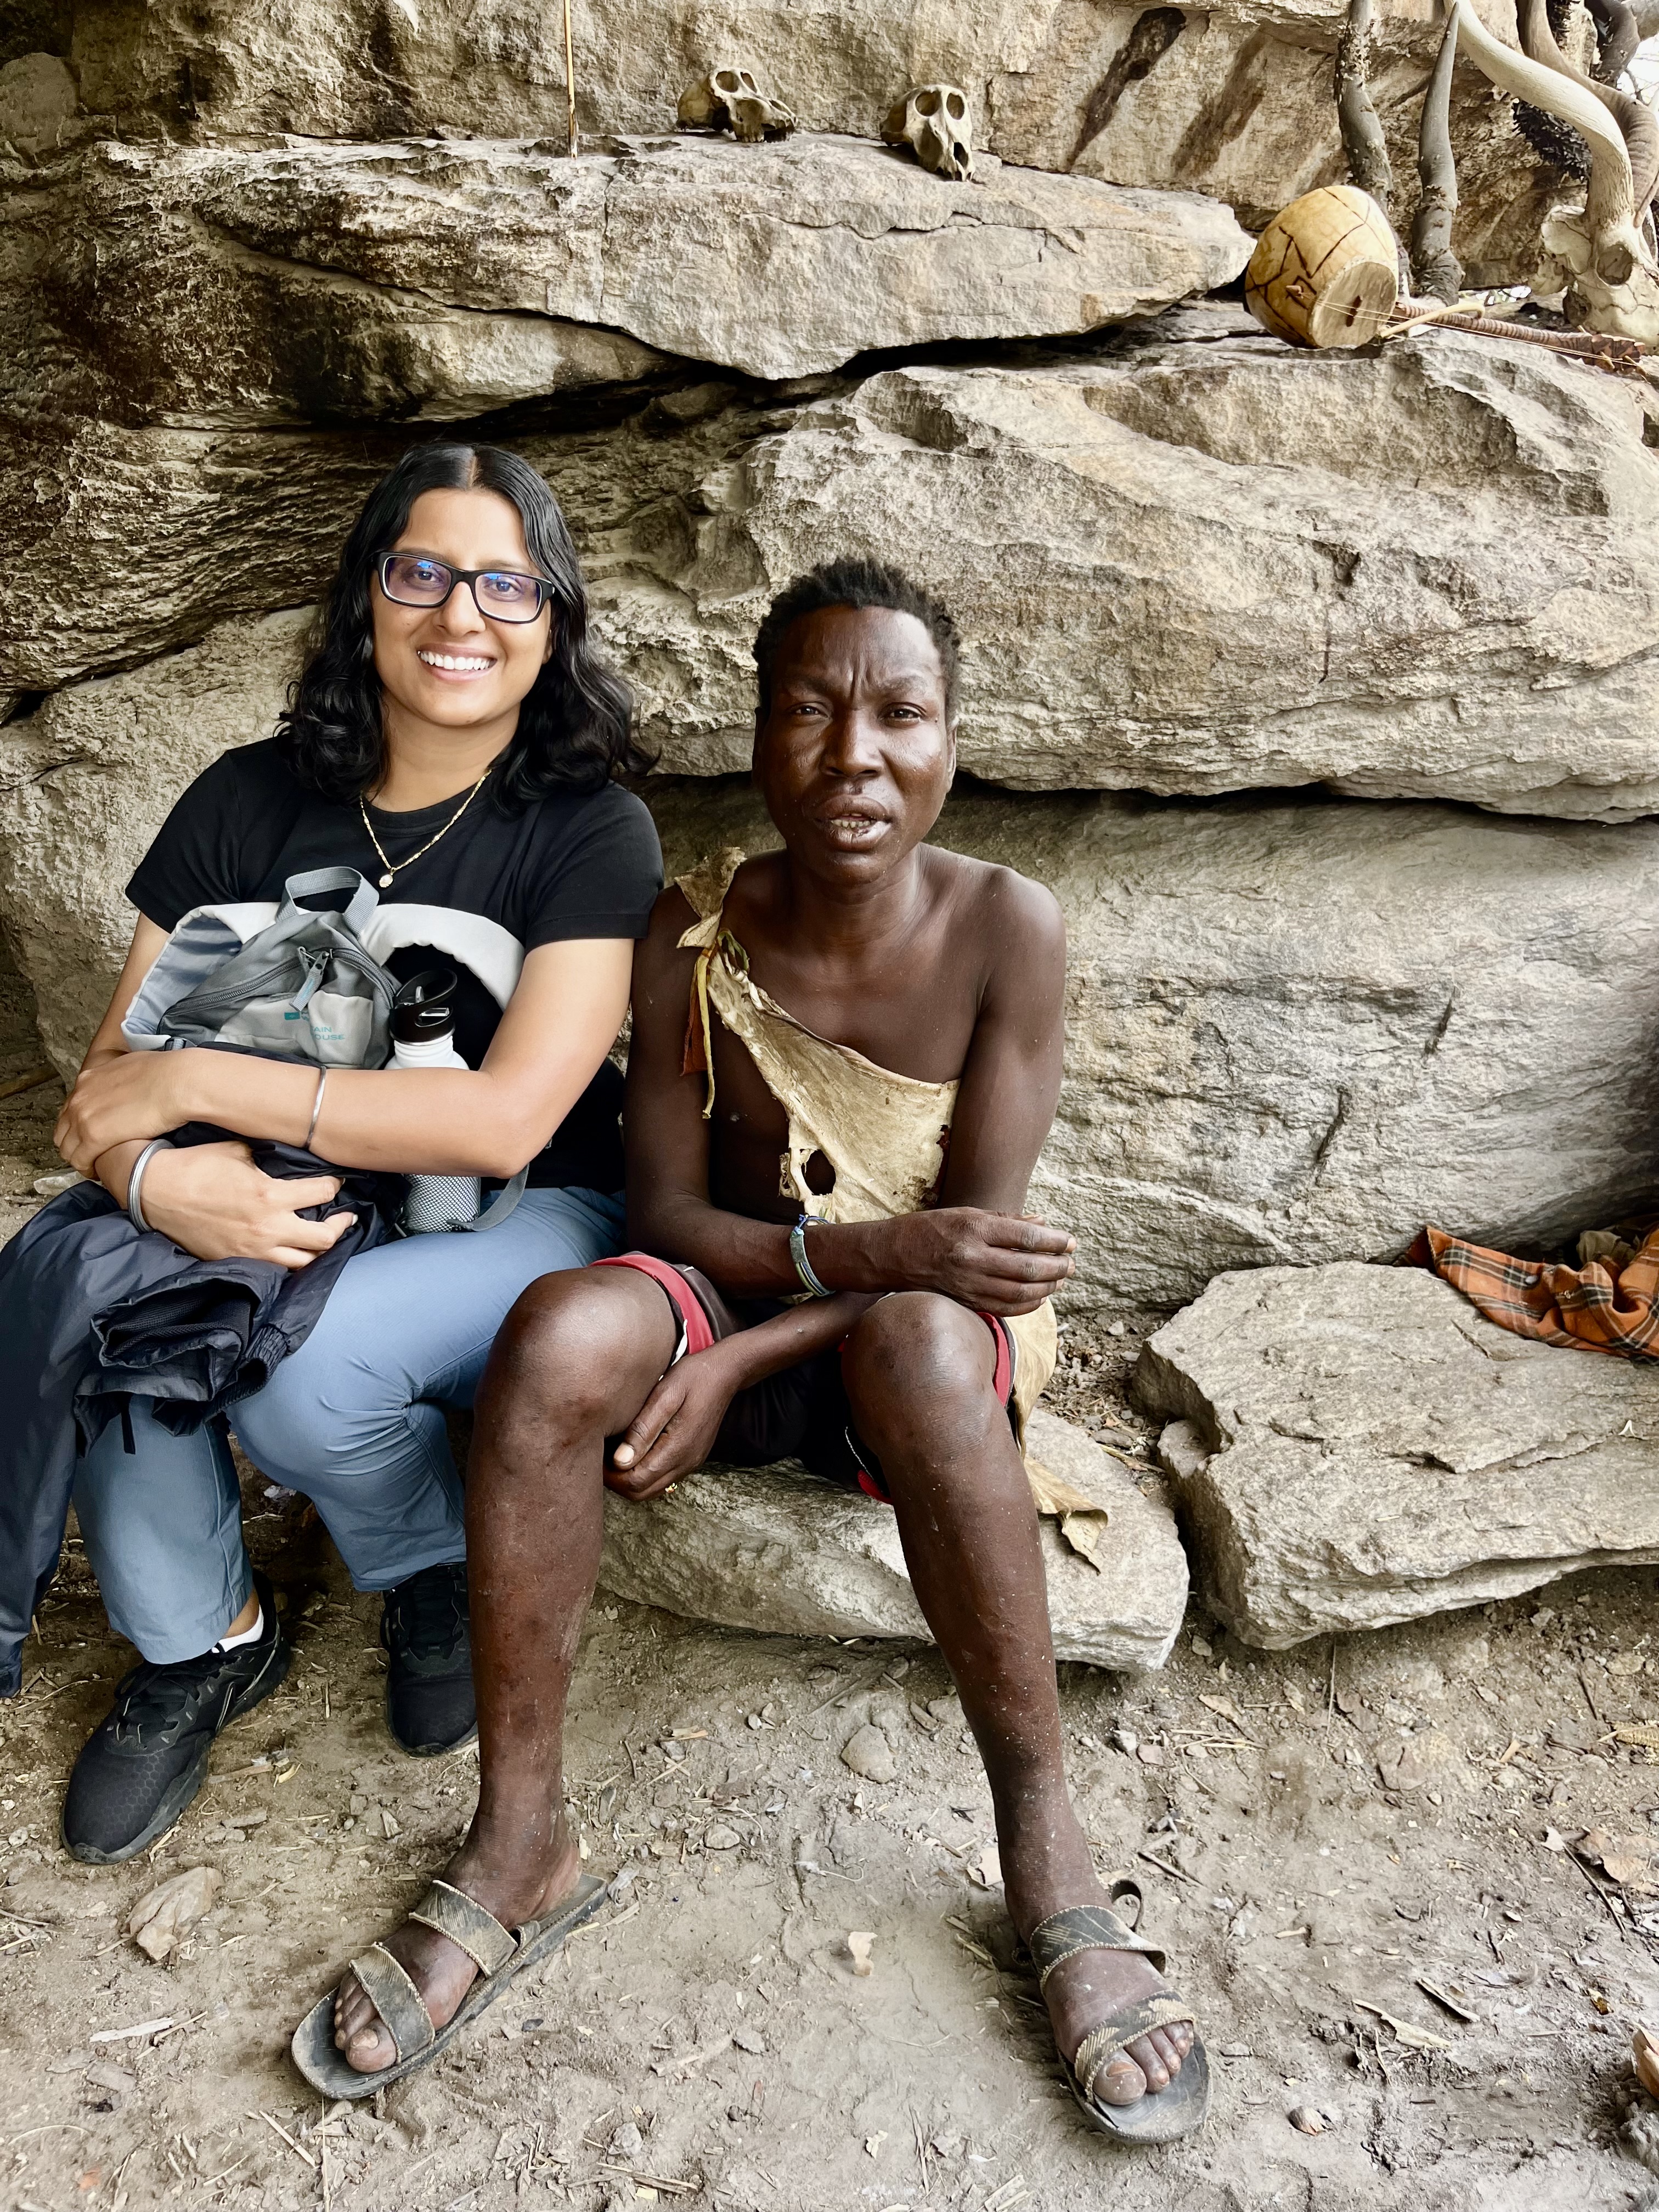 While visiting one of the last remaining hunter-gatherer Hadzabe community on earth